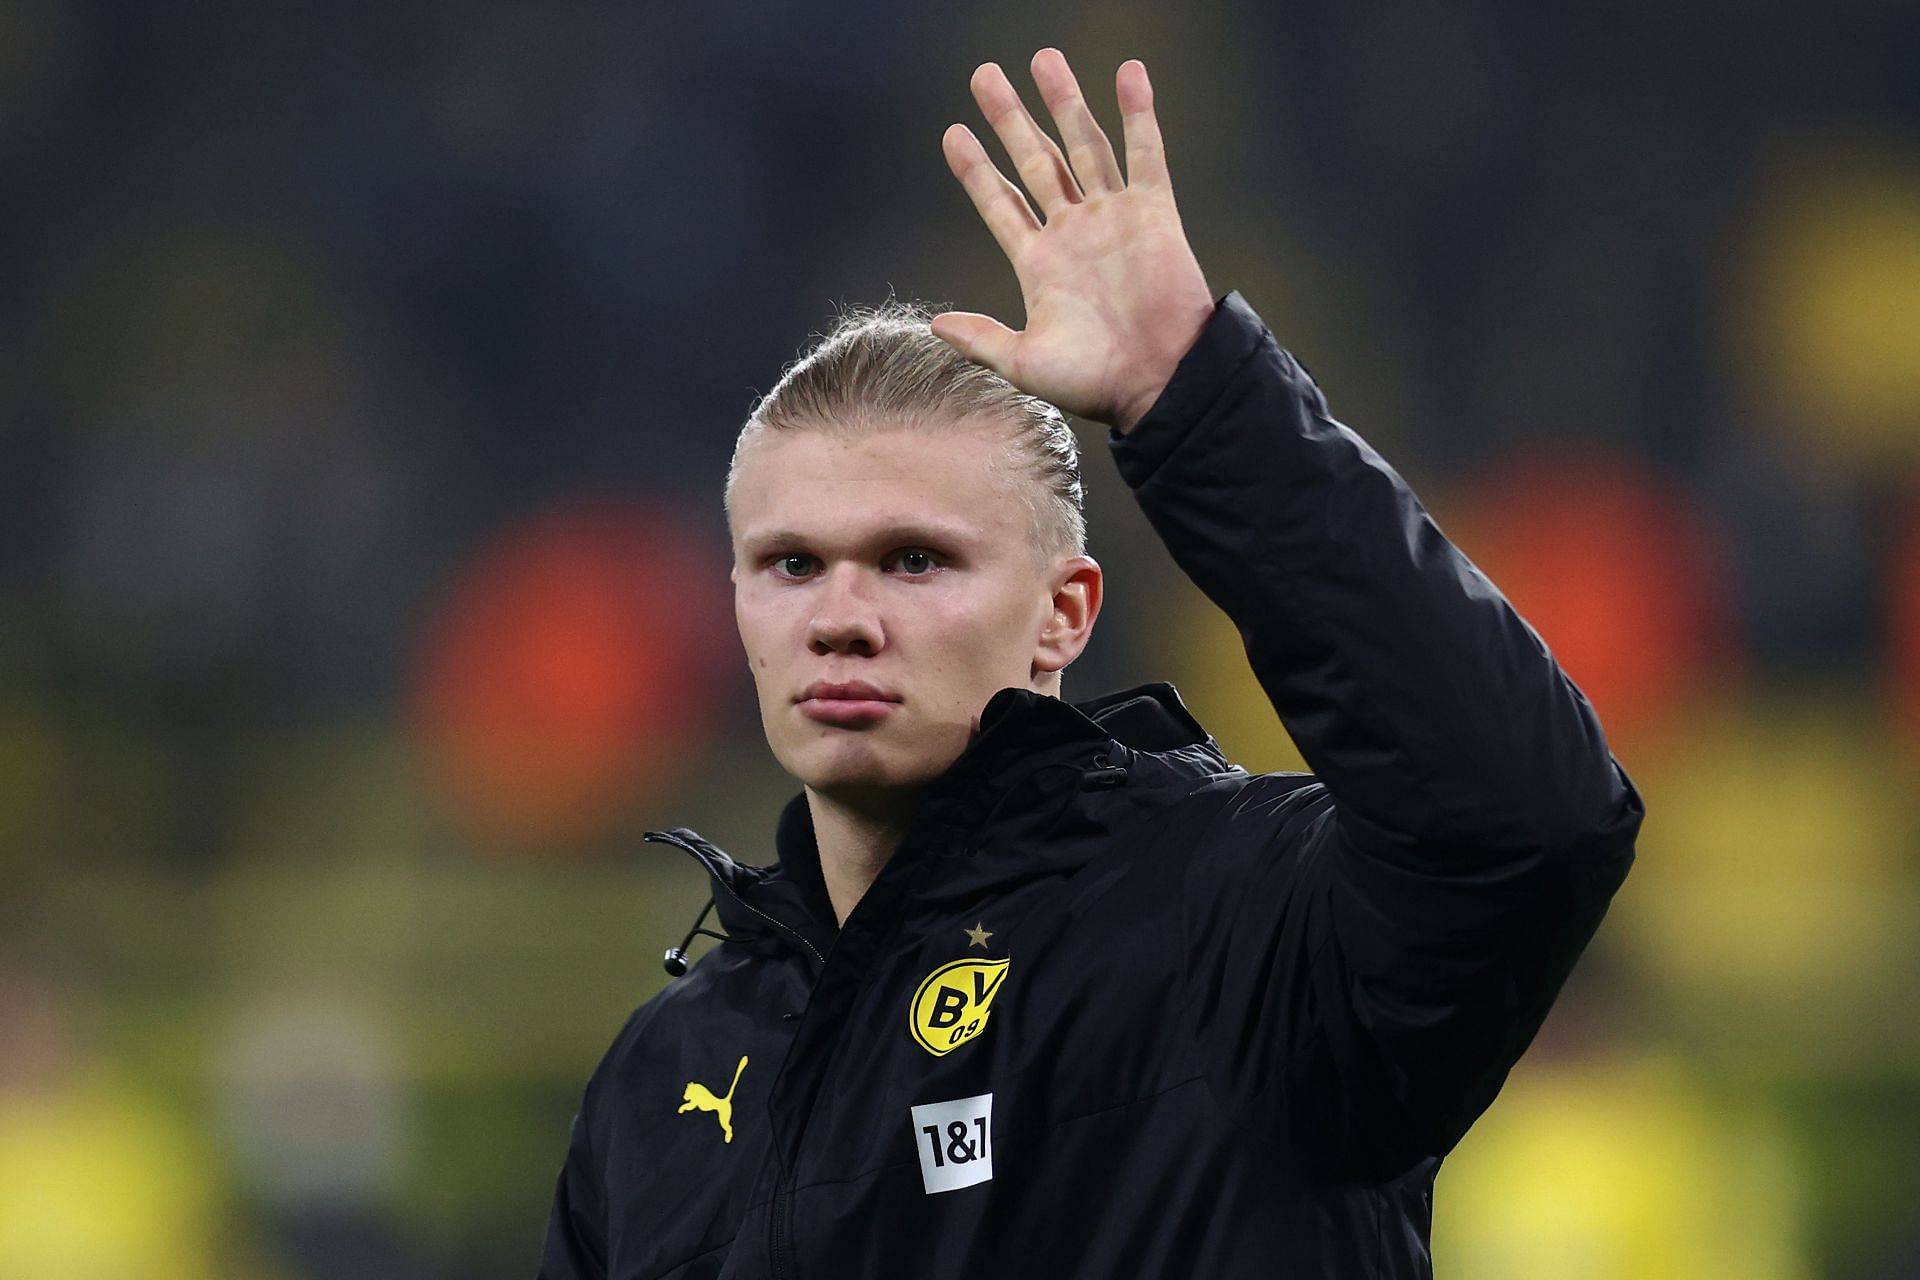 Erling Haaland is one of several big-name players who could leave the Bundesliga next year.